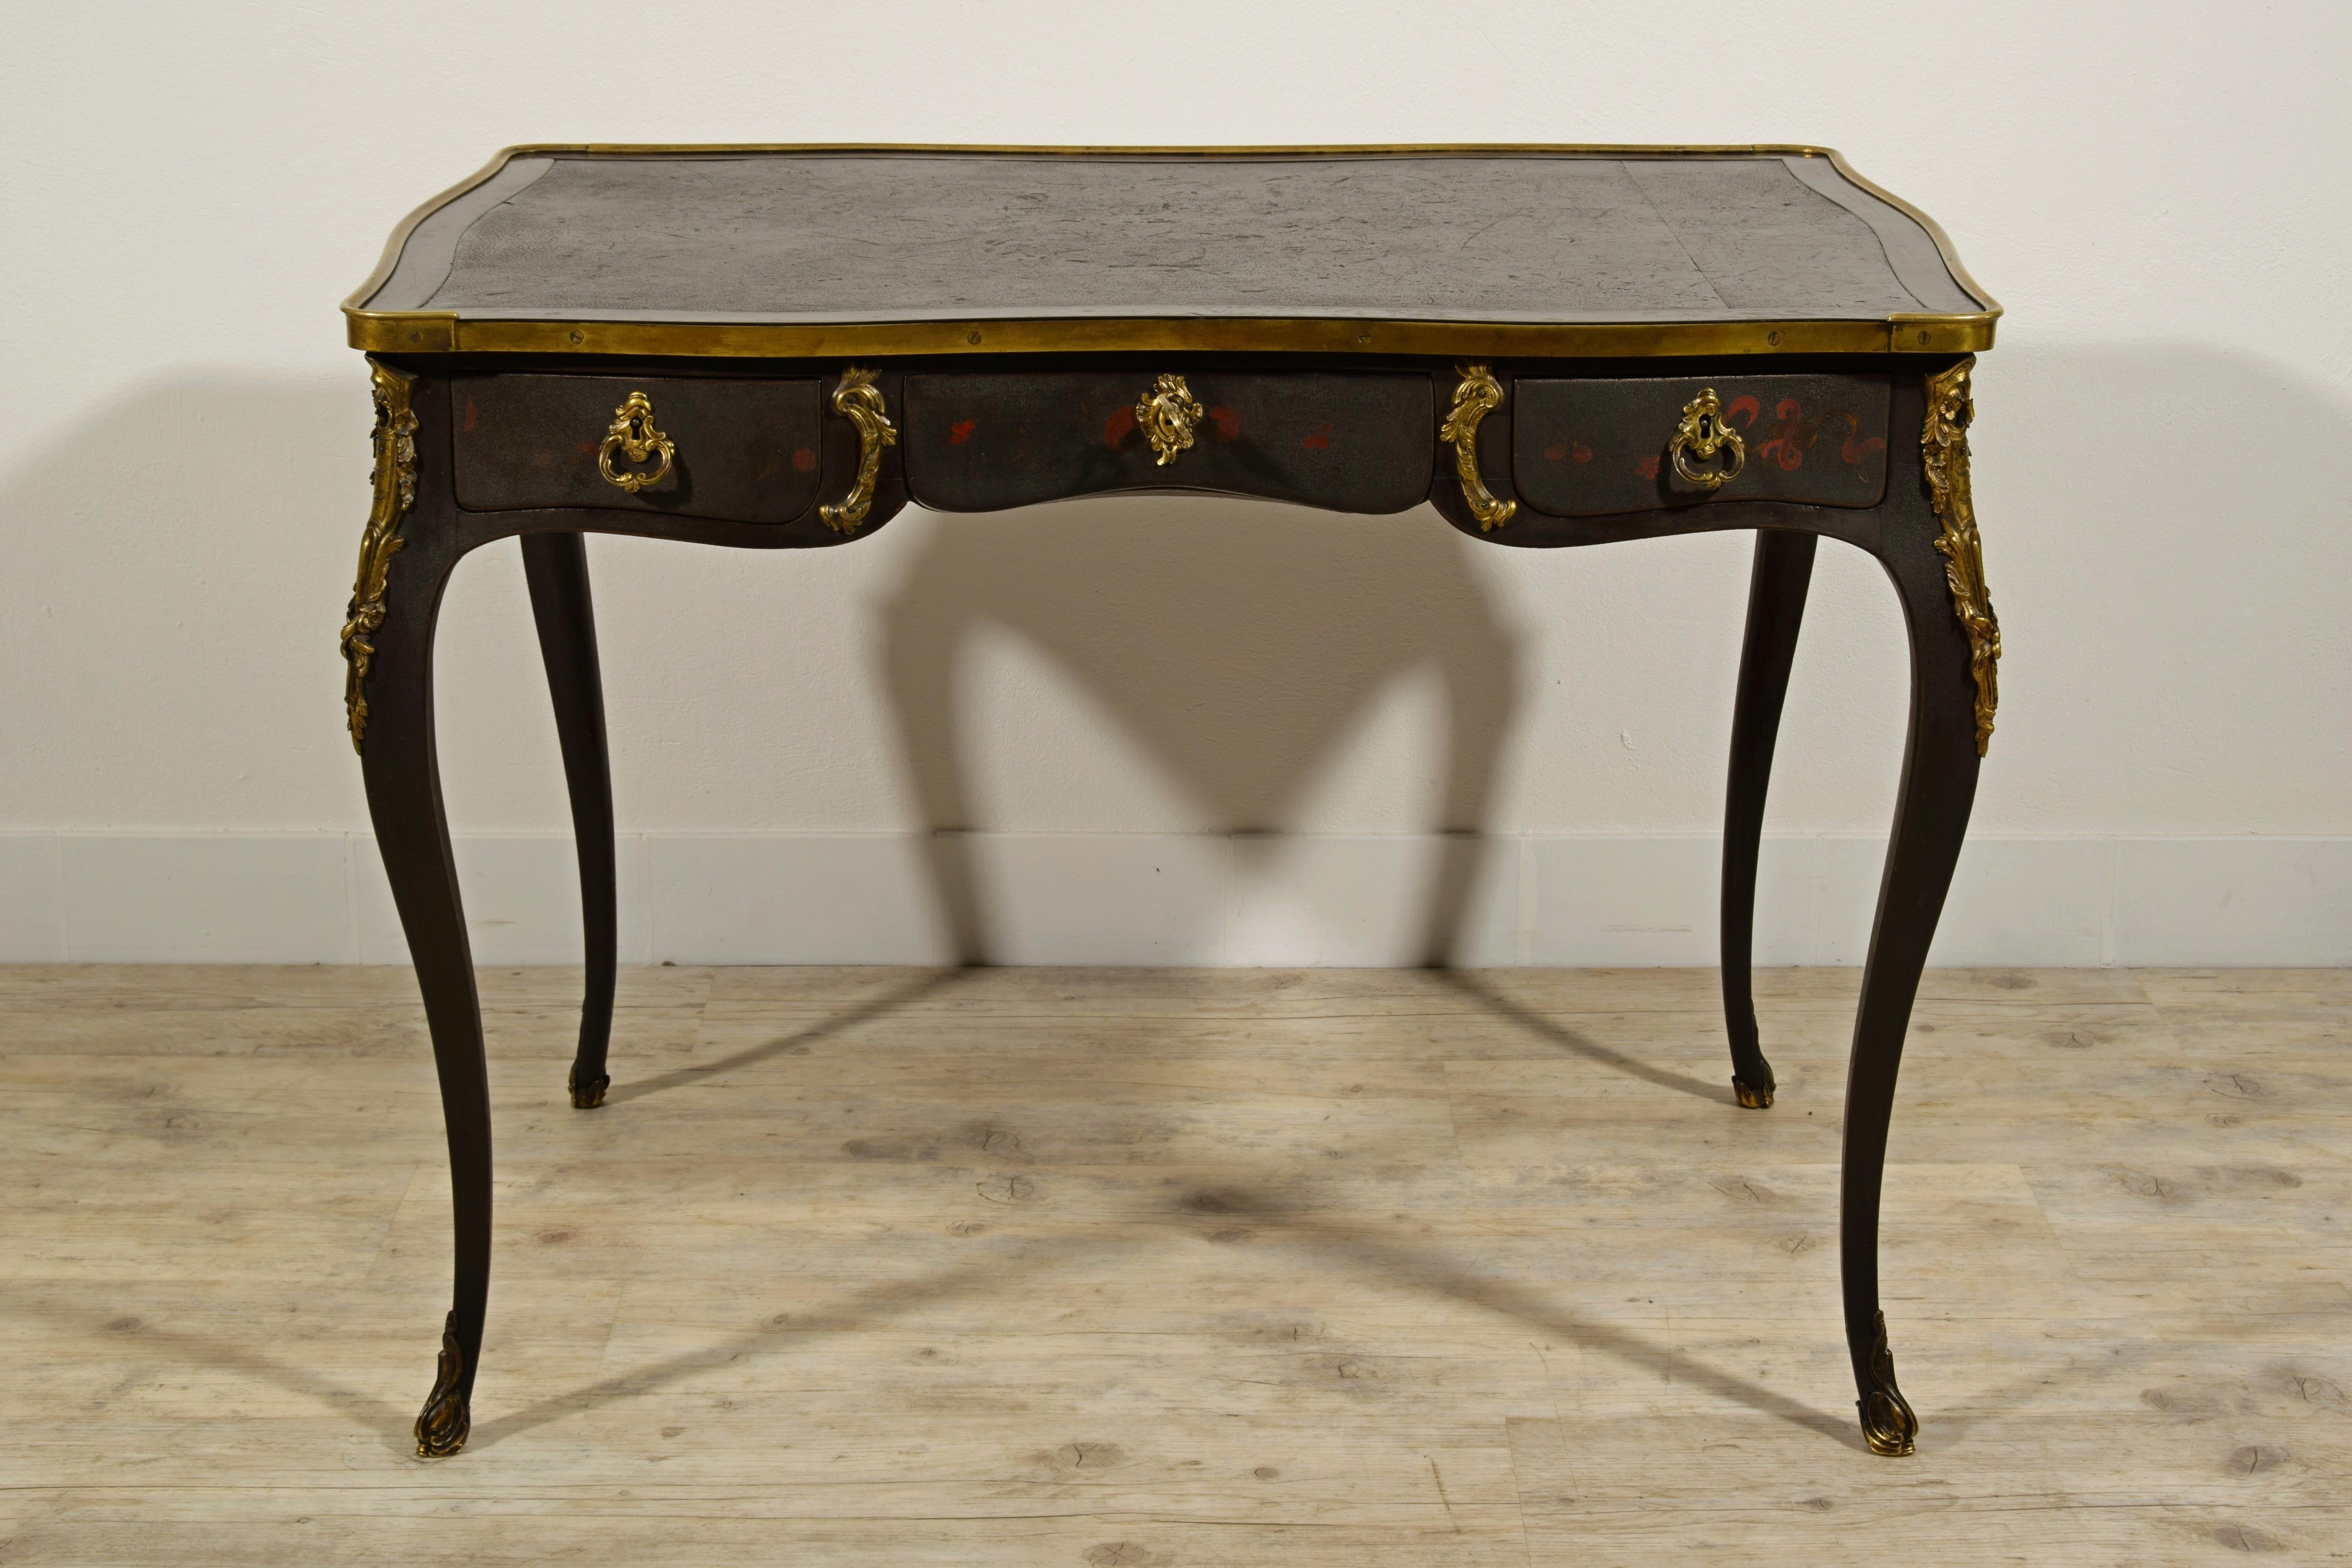 19th century, French Louis XV style, lacquered wood desk

This elegant lacquered wooden desk was made in France between the end of the 19th century and the beginning of the 20th century in the Louis XV style. The floor is moved and lined in